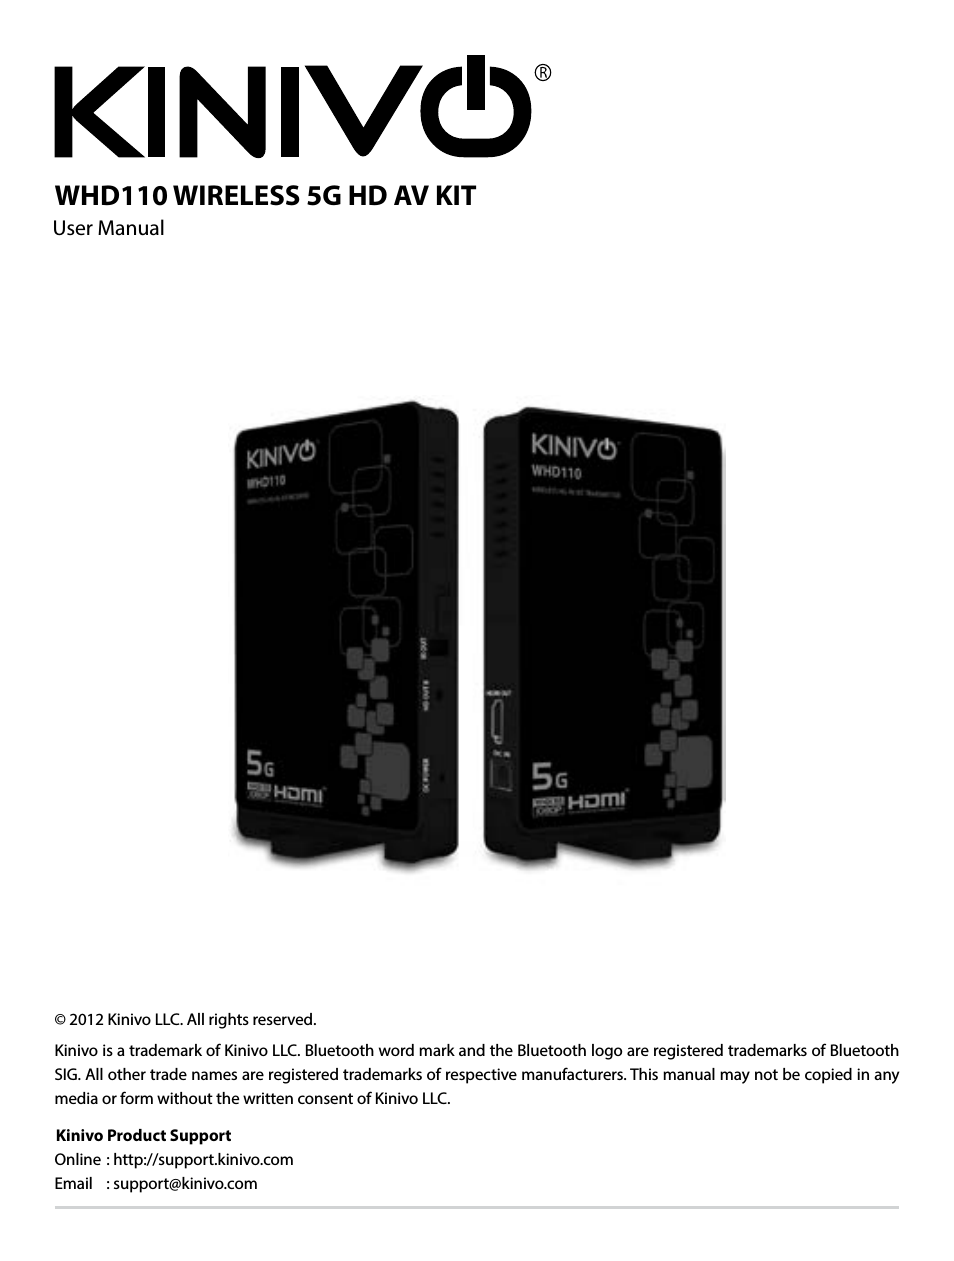 Kinivo Logo - Kinivo WHD110 Wireless 5G HDMI Transmitter and Receiver System User